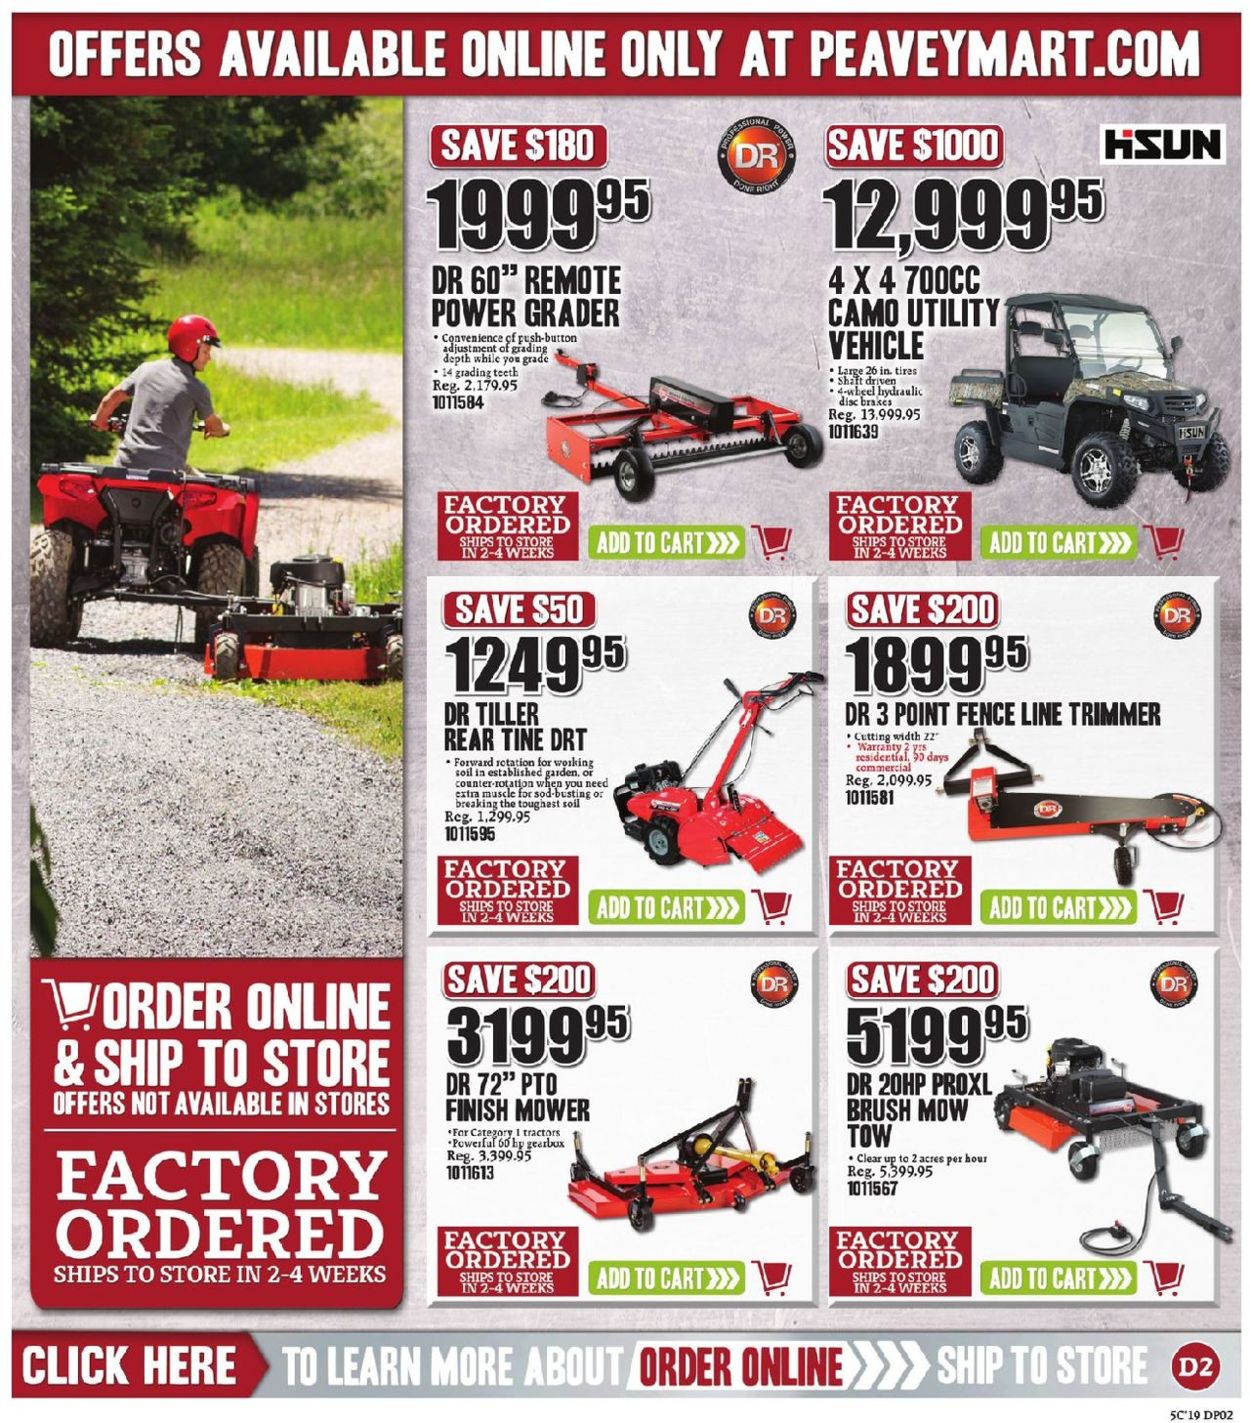 Peavey Mart Flyer from 05/17/2019